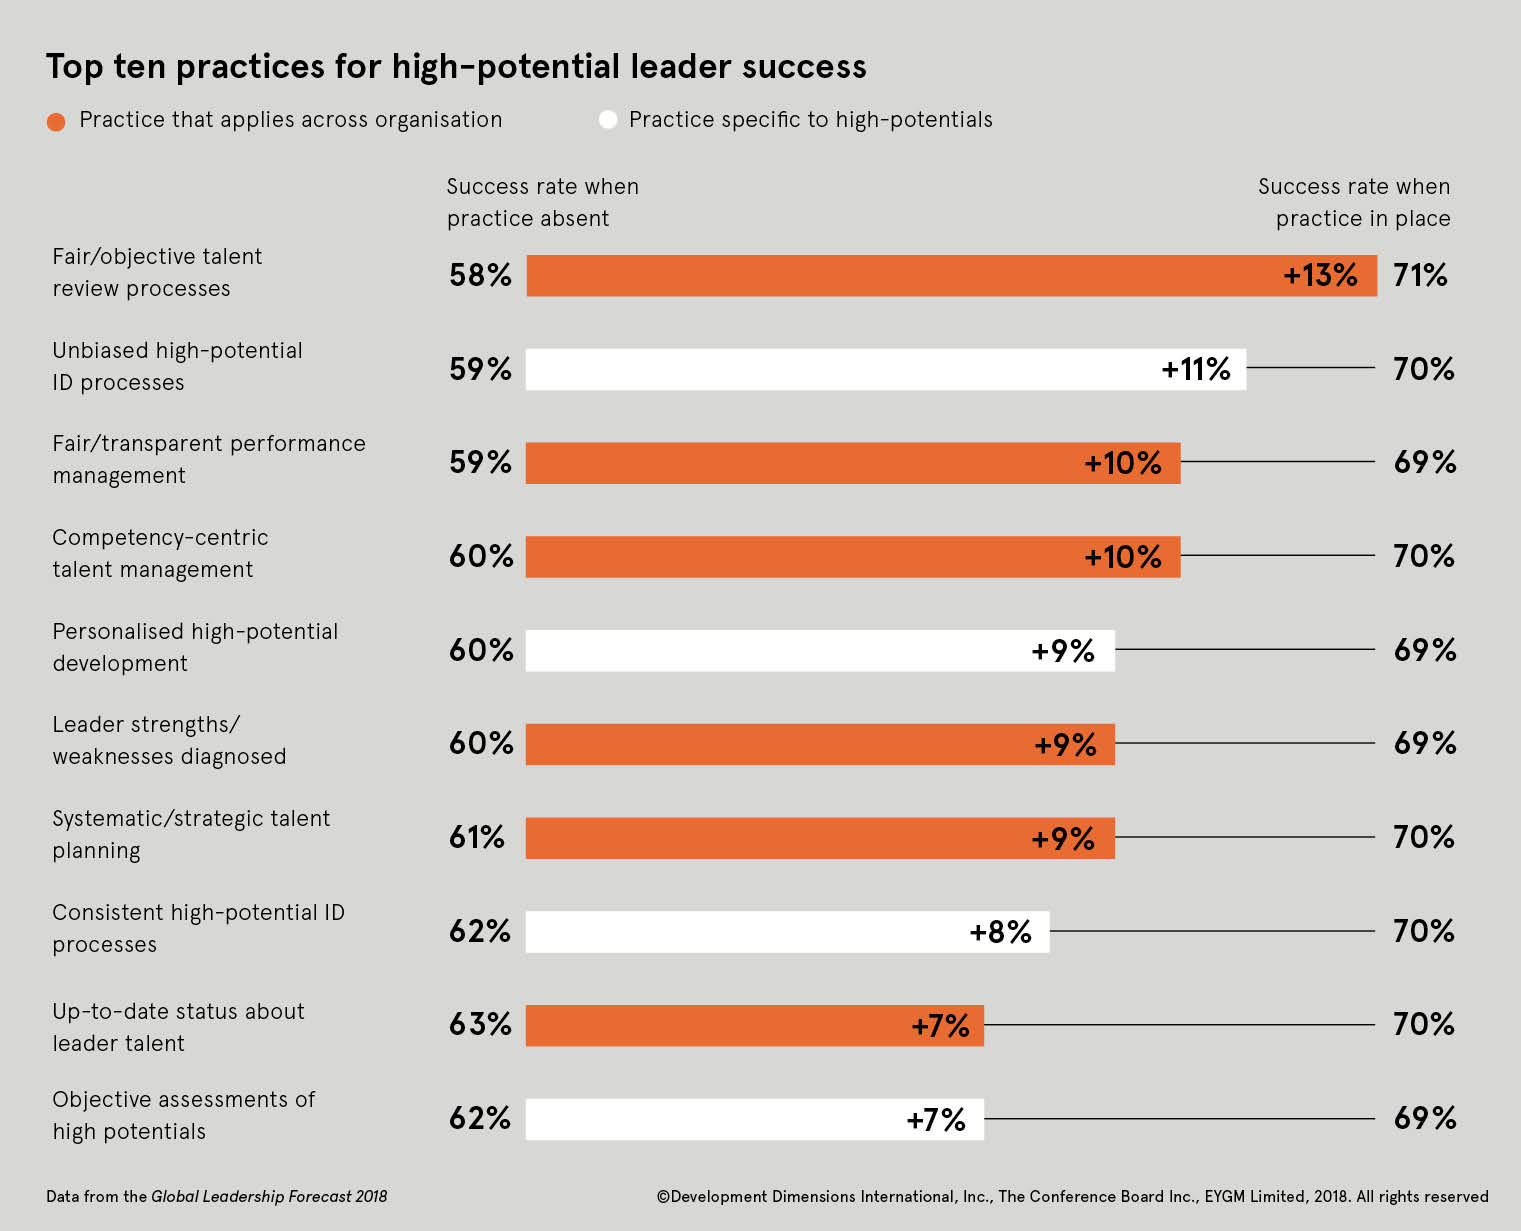 Top ten practices for high-potential leader success